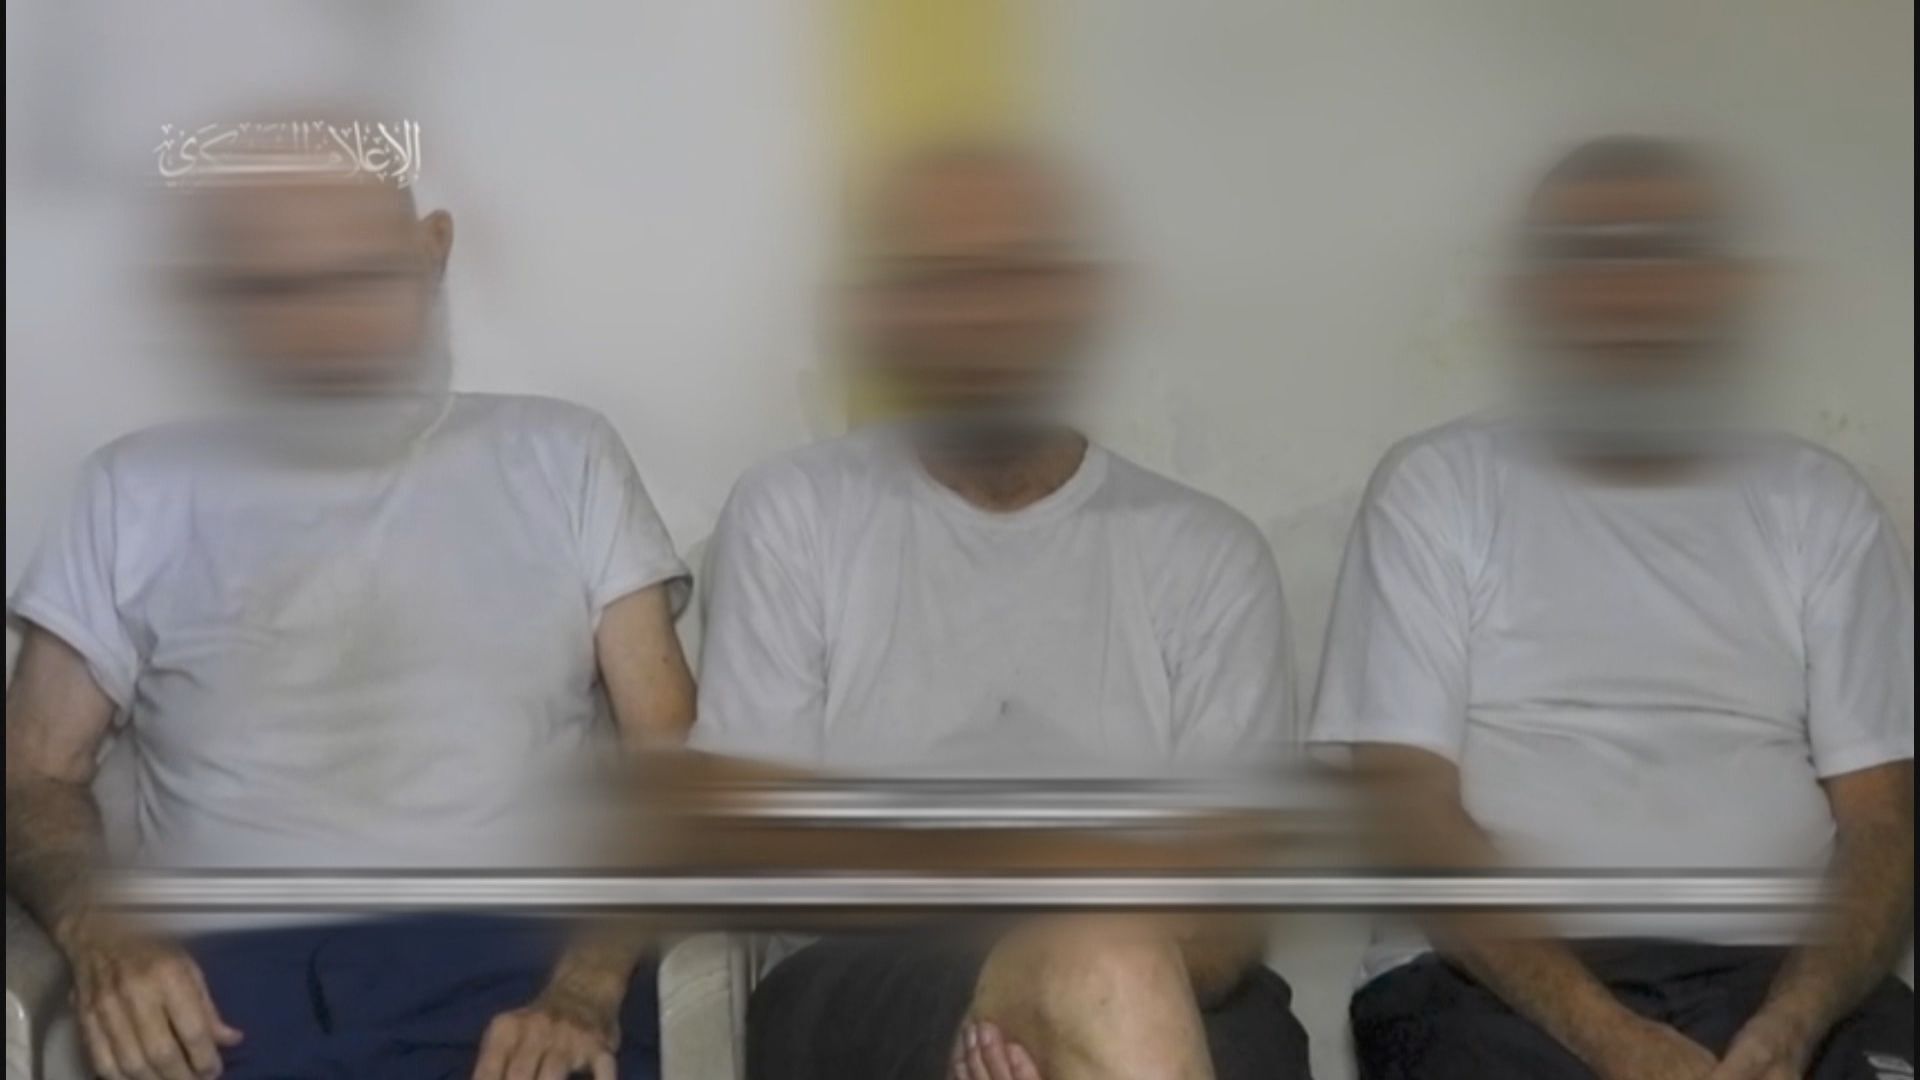 Hamas posts video showing elderly Israeli captives pleading for release | Israel-Palestine conflict News